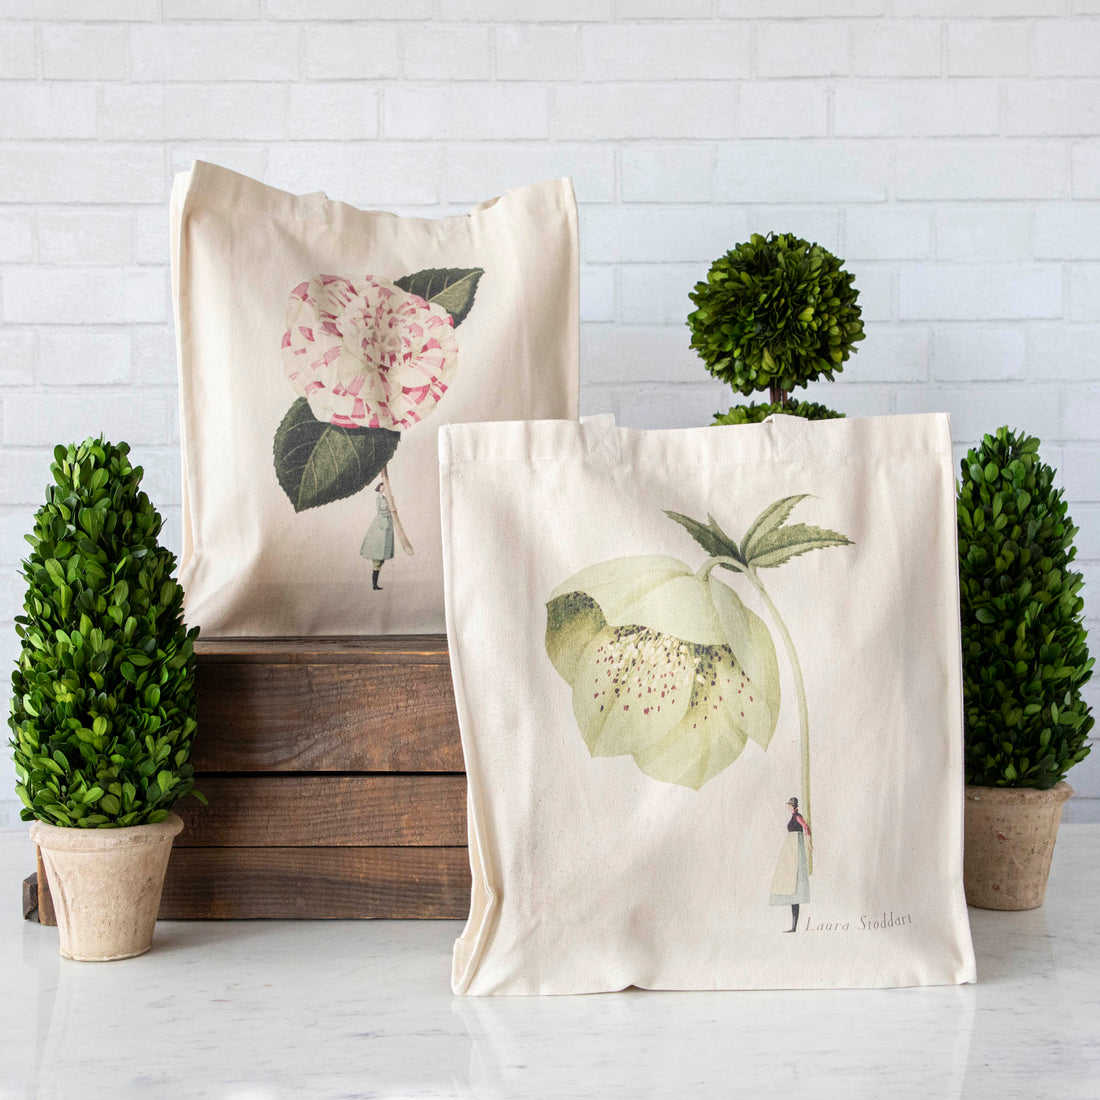 Two Hester &amp; Cook heavyweight canvas tote bags with floral prints leaning against wooden crates beside potted topiary plants.